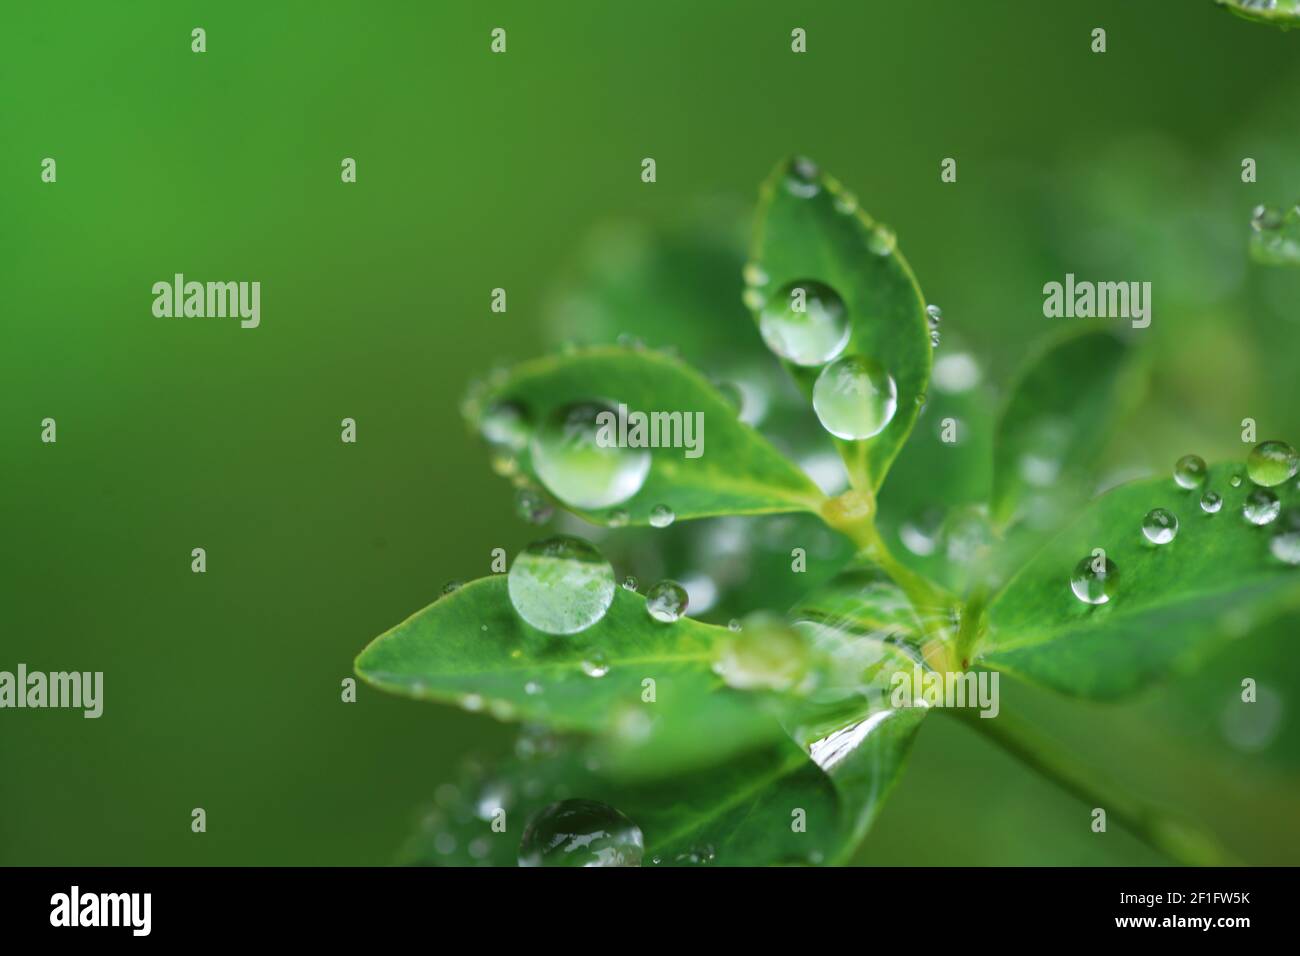 Earth Day. Ecological . Green leaves with water drops on blurred bright green background.Beautiful nature background.Green plants on green background Stock Photo